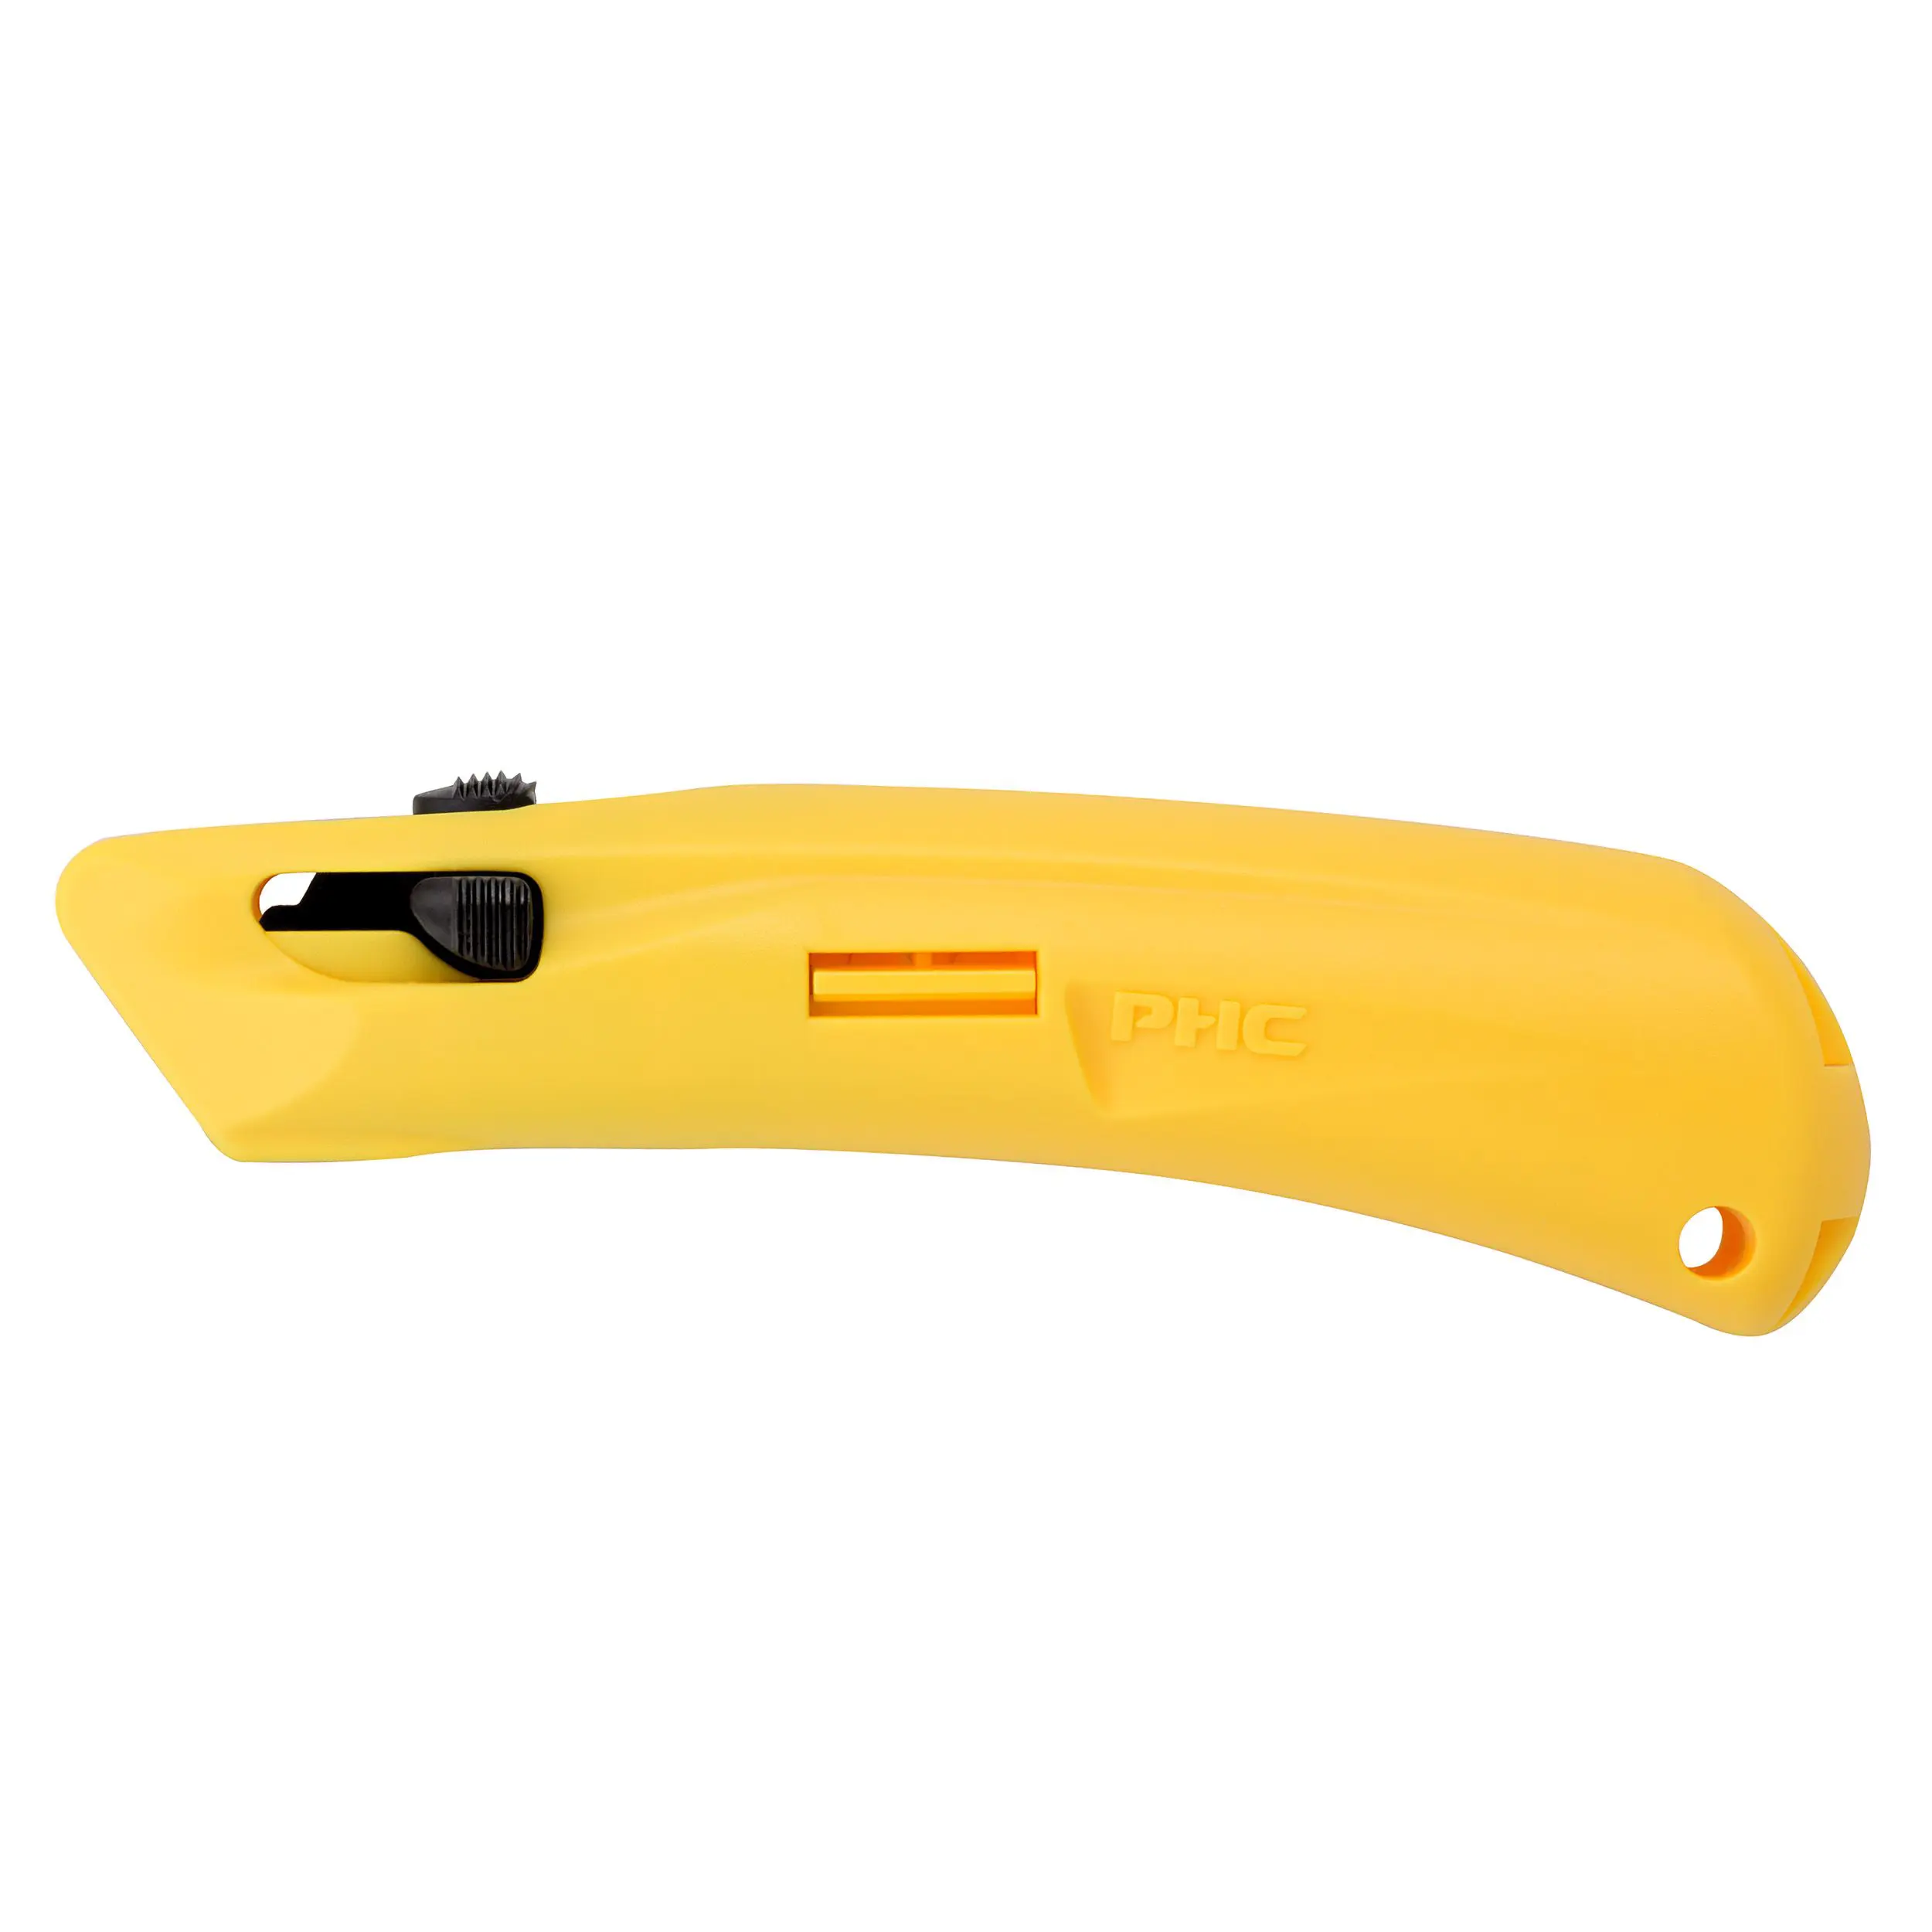 Pacific Safety 3 Position Box Cutter